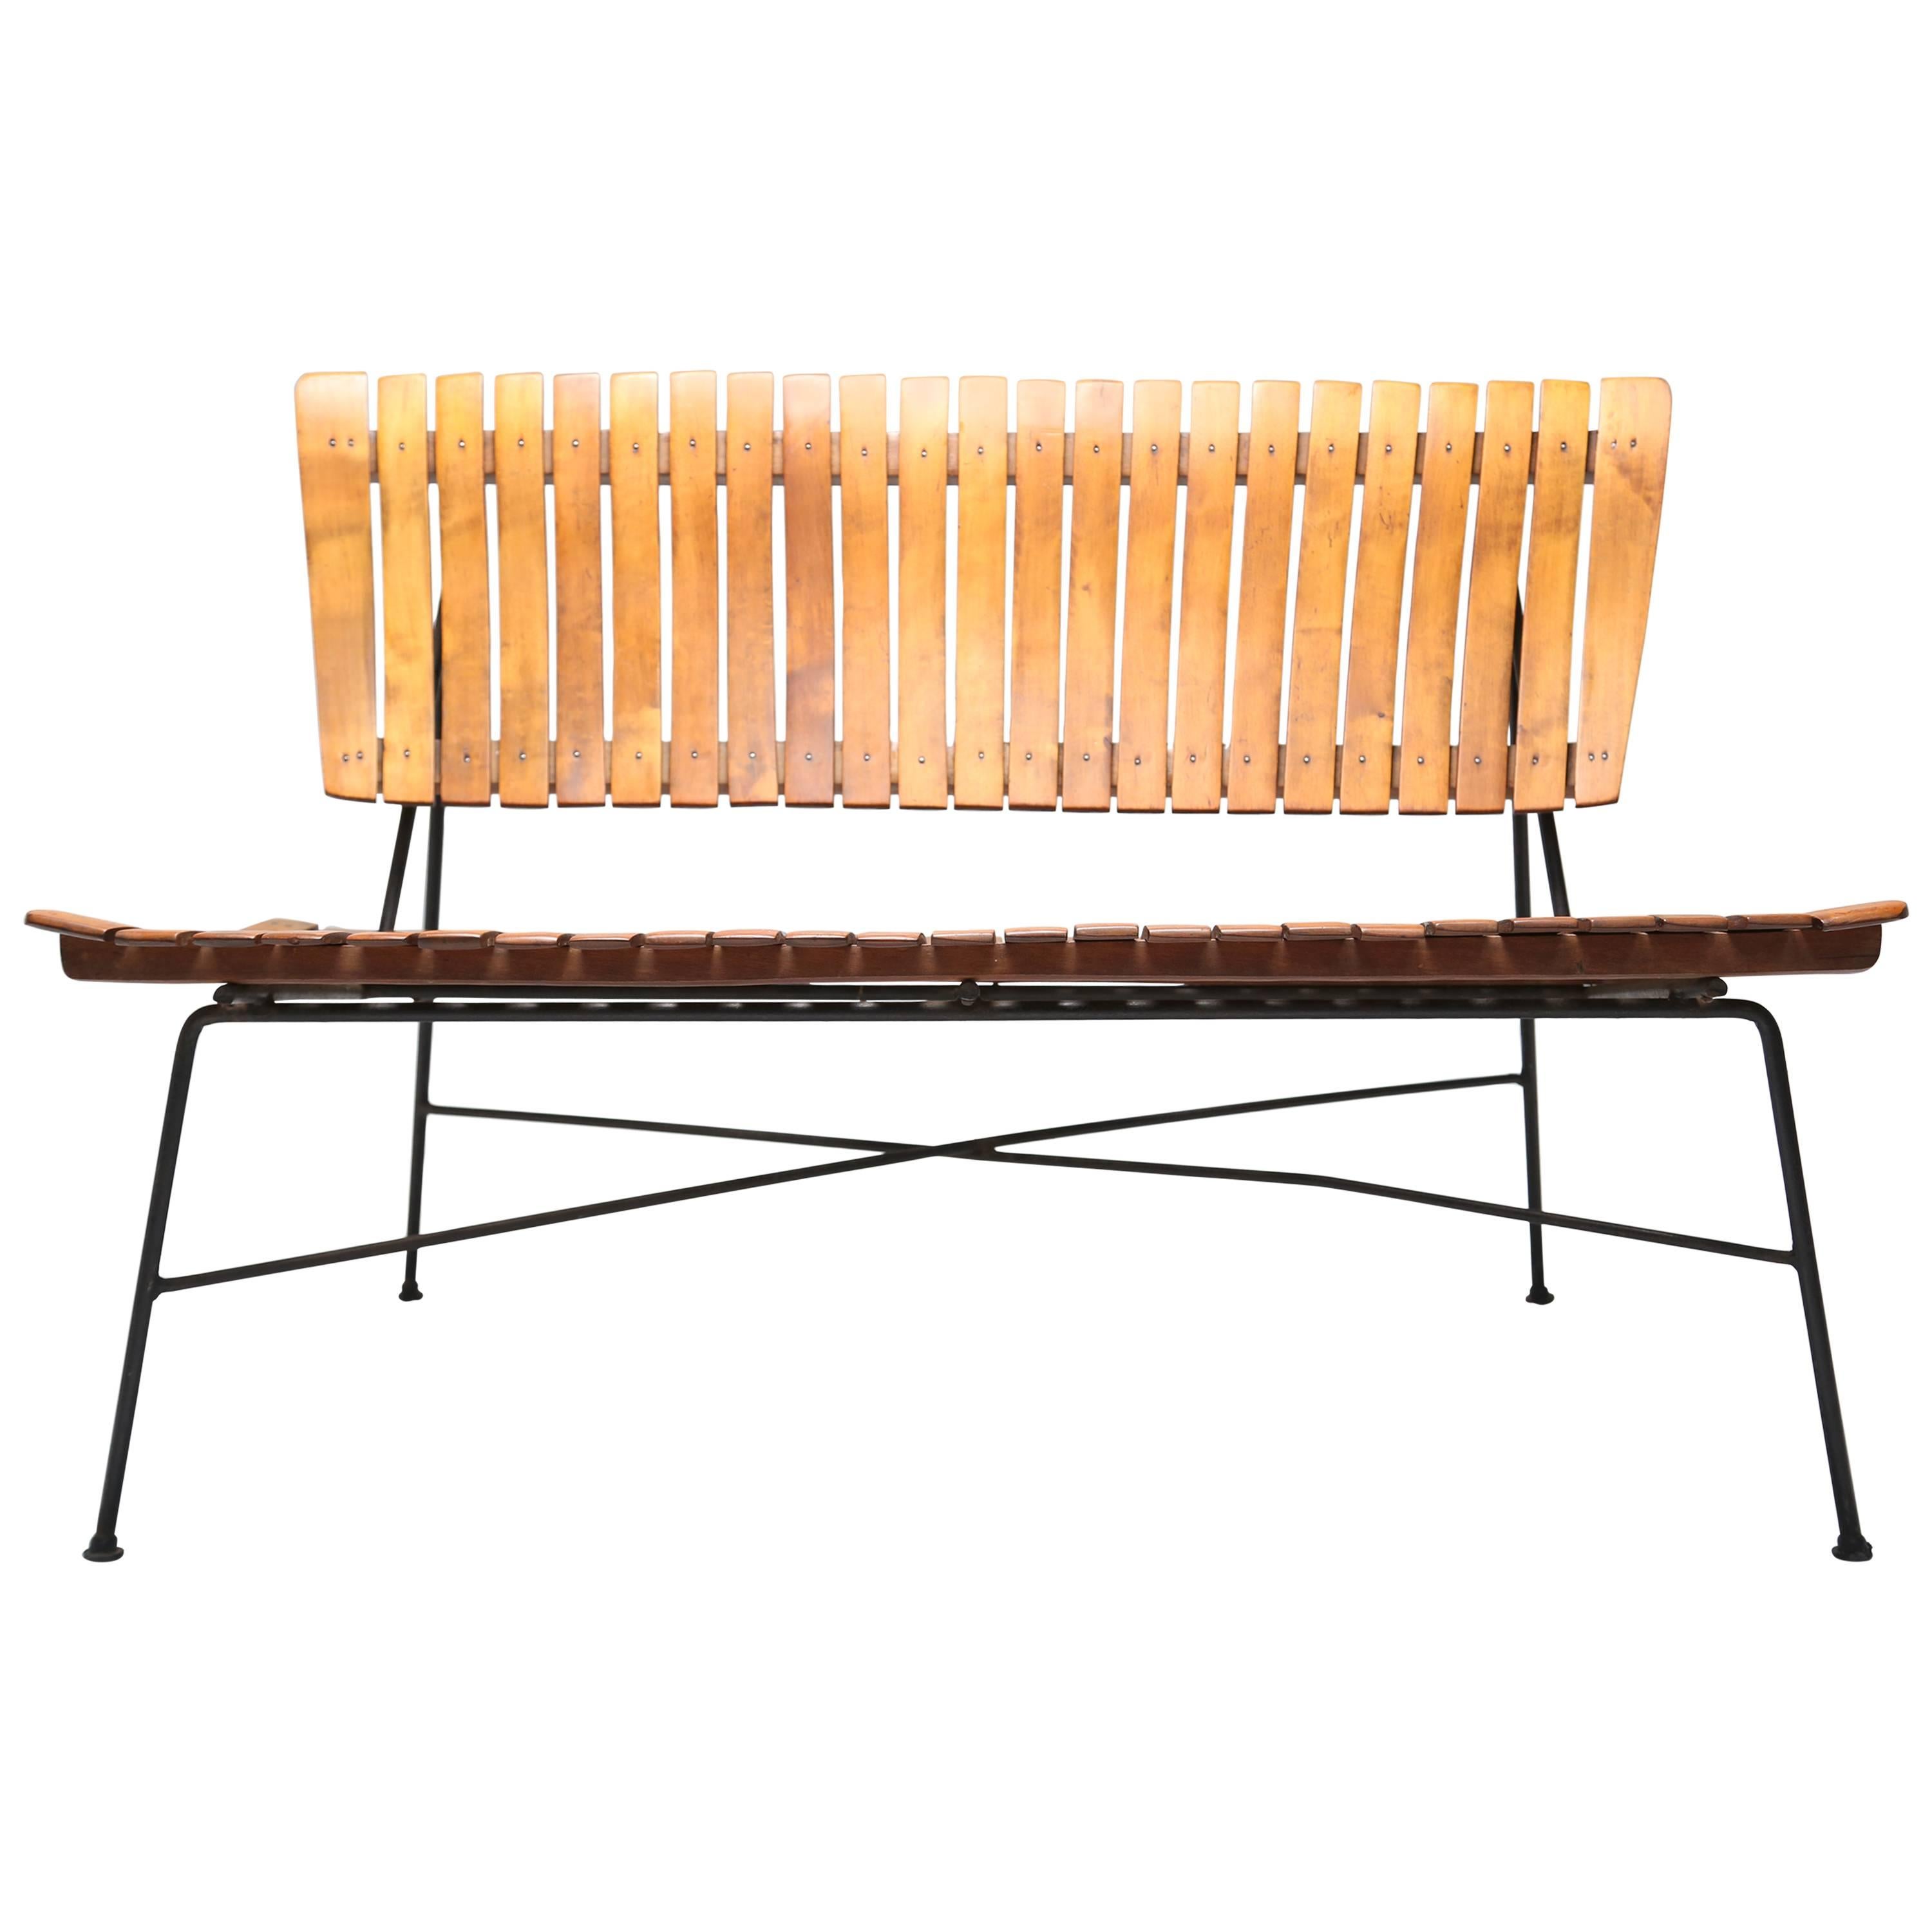 Arthur Umanoff 1950s iron frame rustic style mid-century slatted bench. For Sale